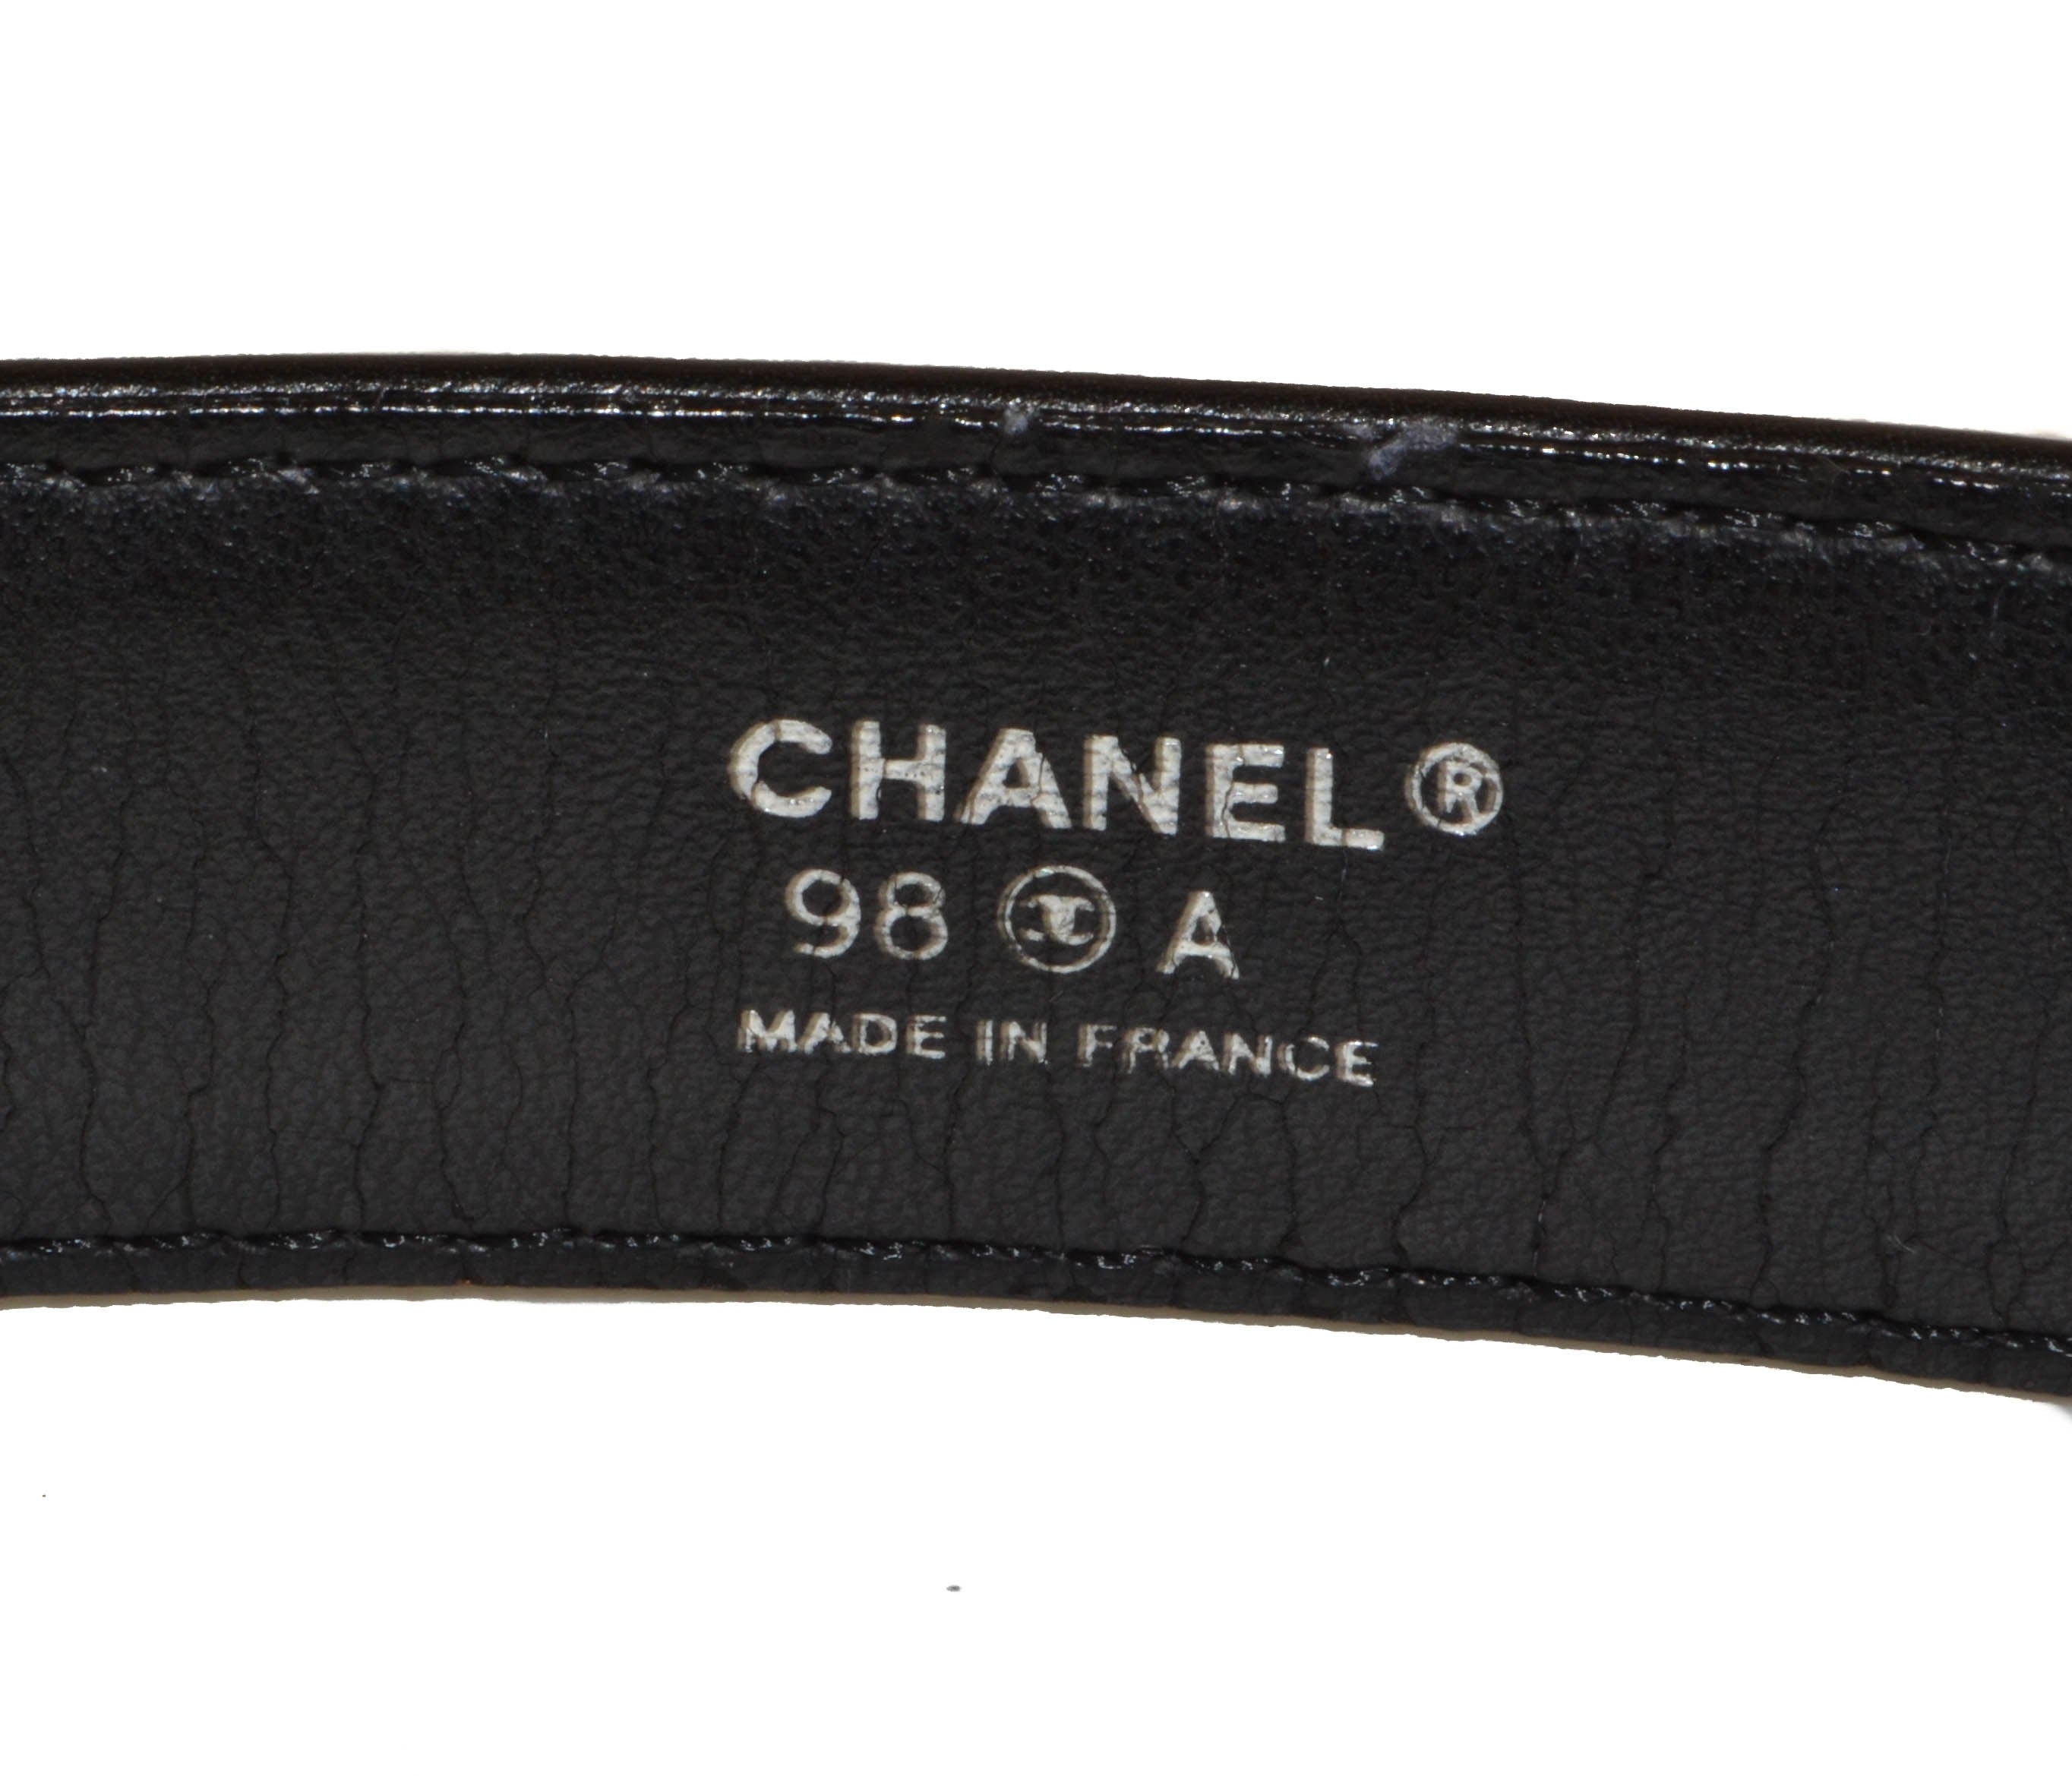 Authentic Chanel Black Leather Small Belt